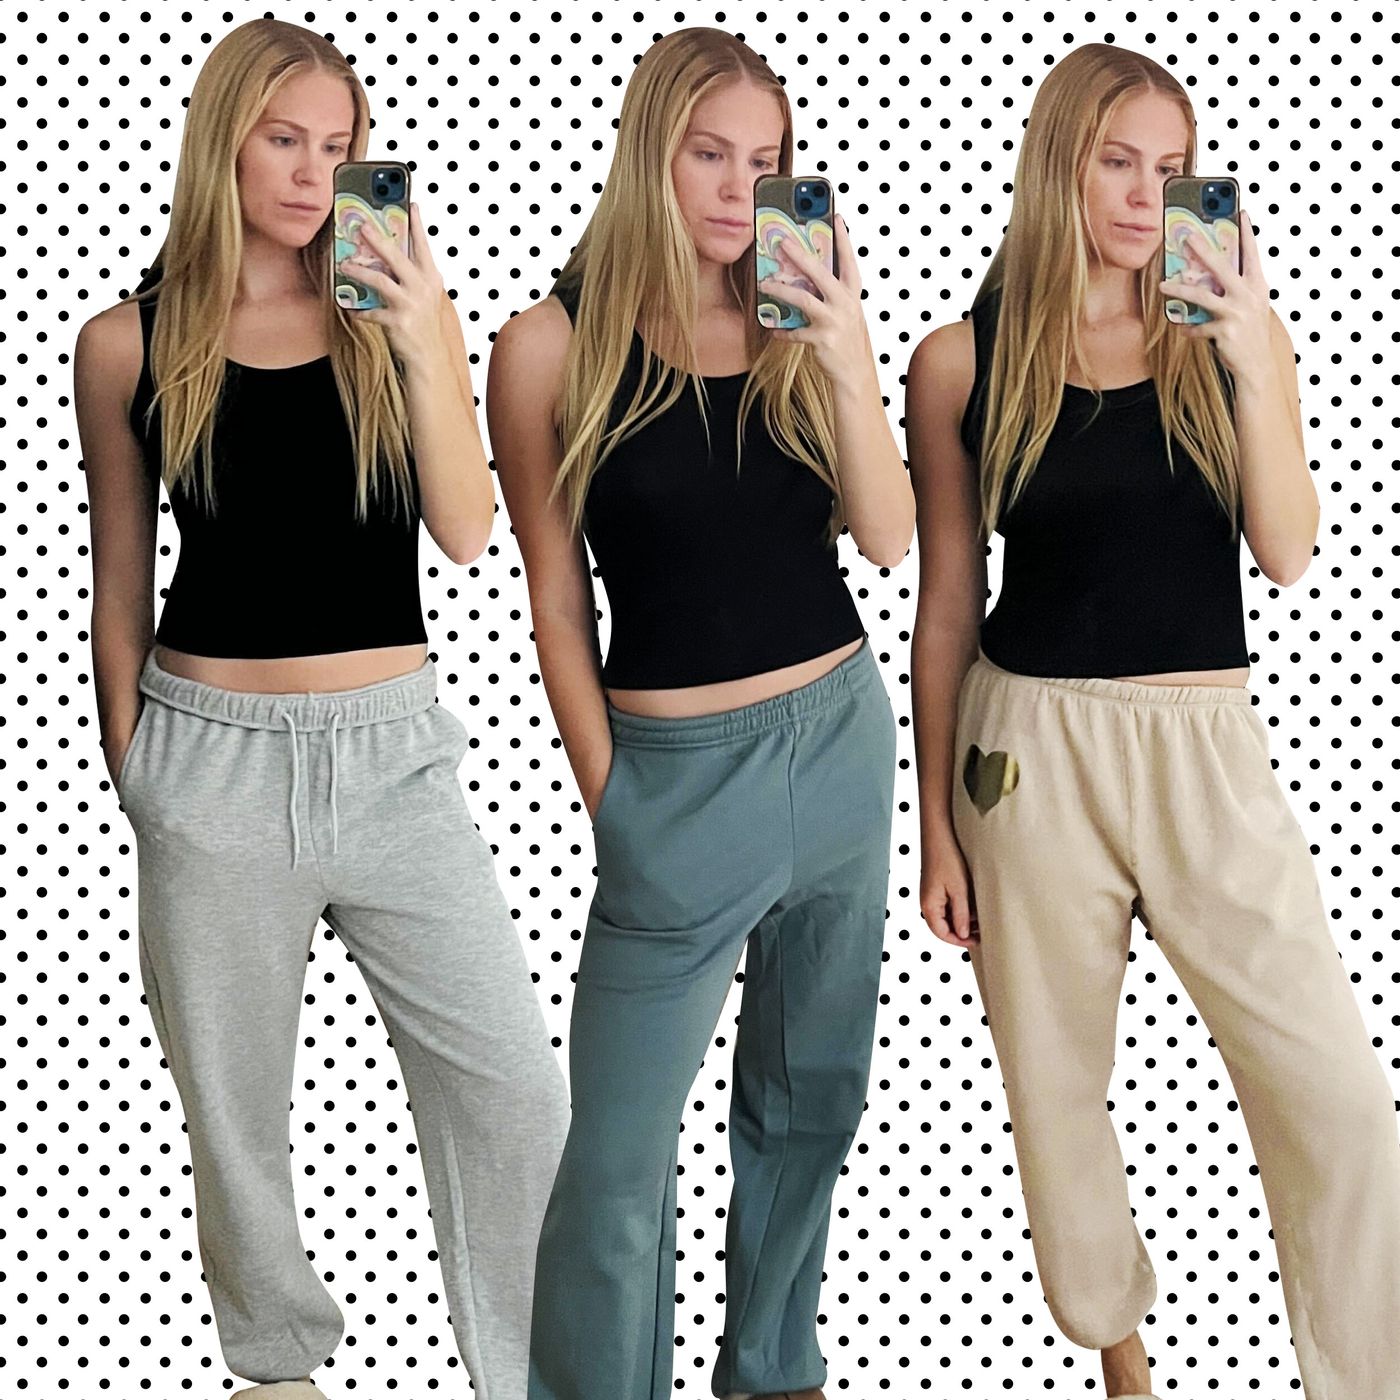 Buy PlusS Women White & Pink Dyed Joggers - Track Pants for Women